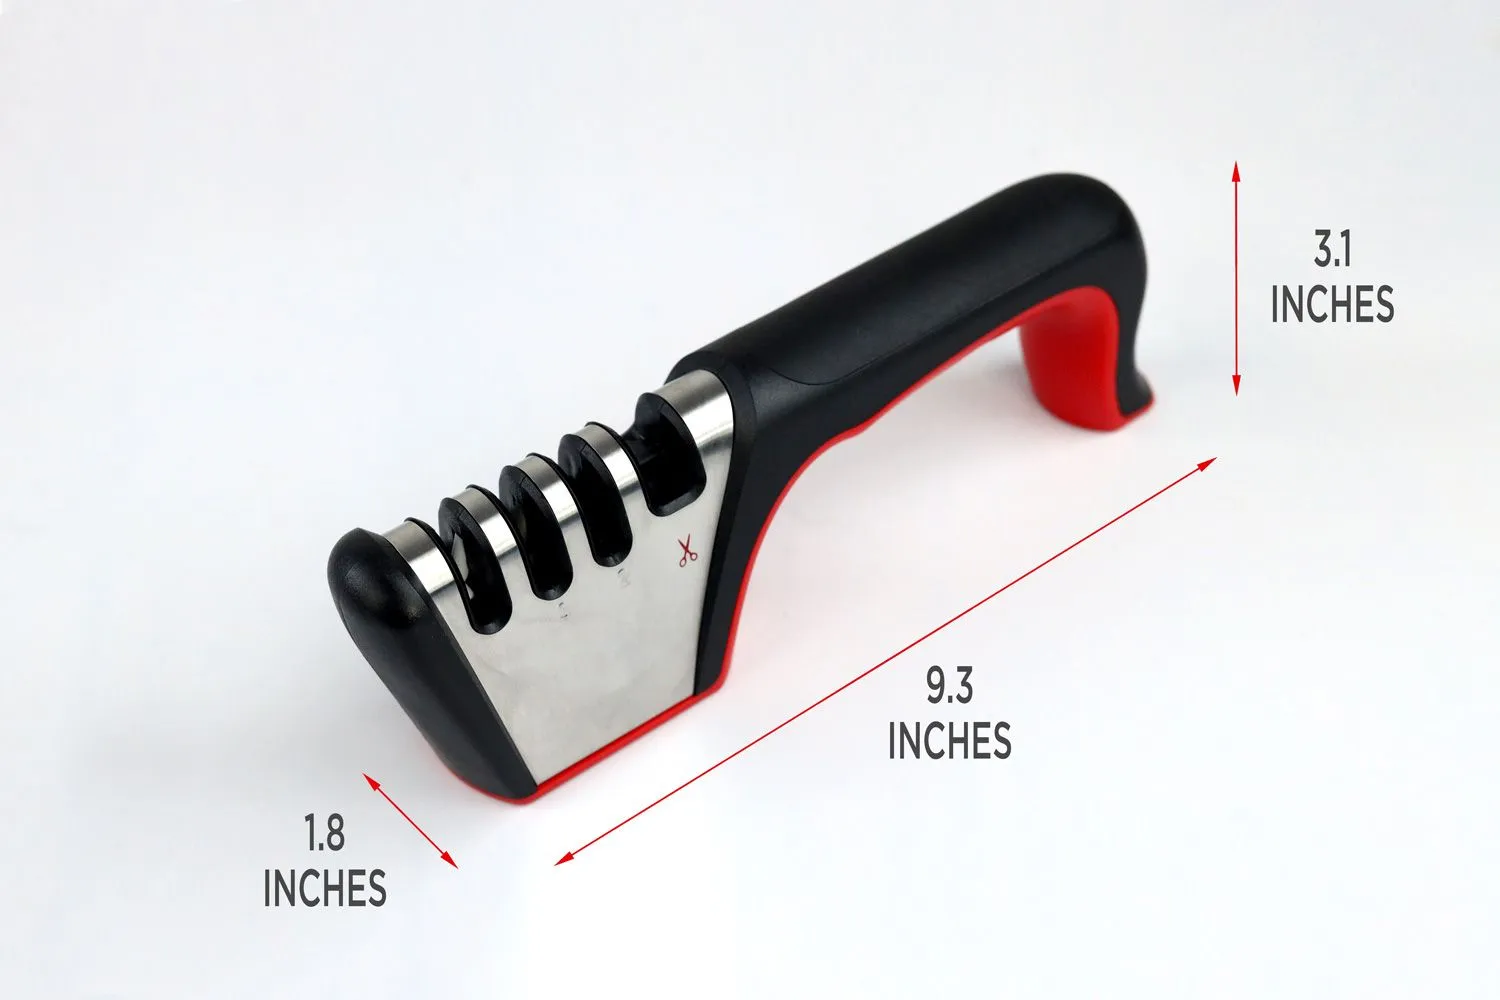 Mueller 4-in-1, 4-Stage Best Knife Sharpener for Hunting, Heavy Duty Diamond Blade Really Works for Ceramic, Steel Knives and Scissors